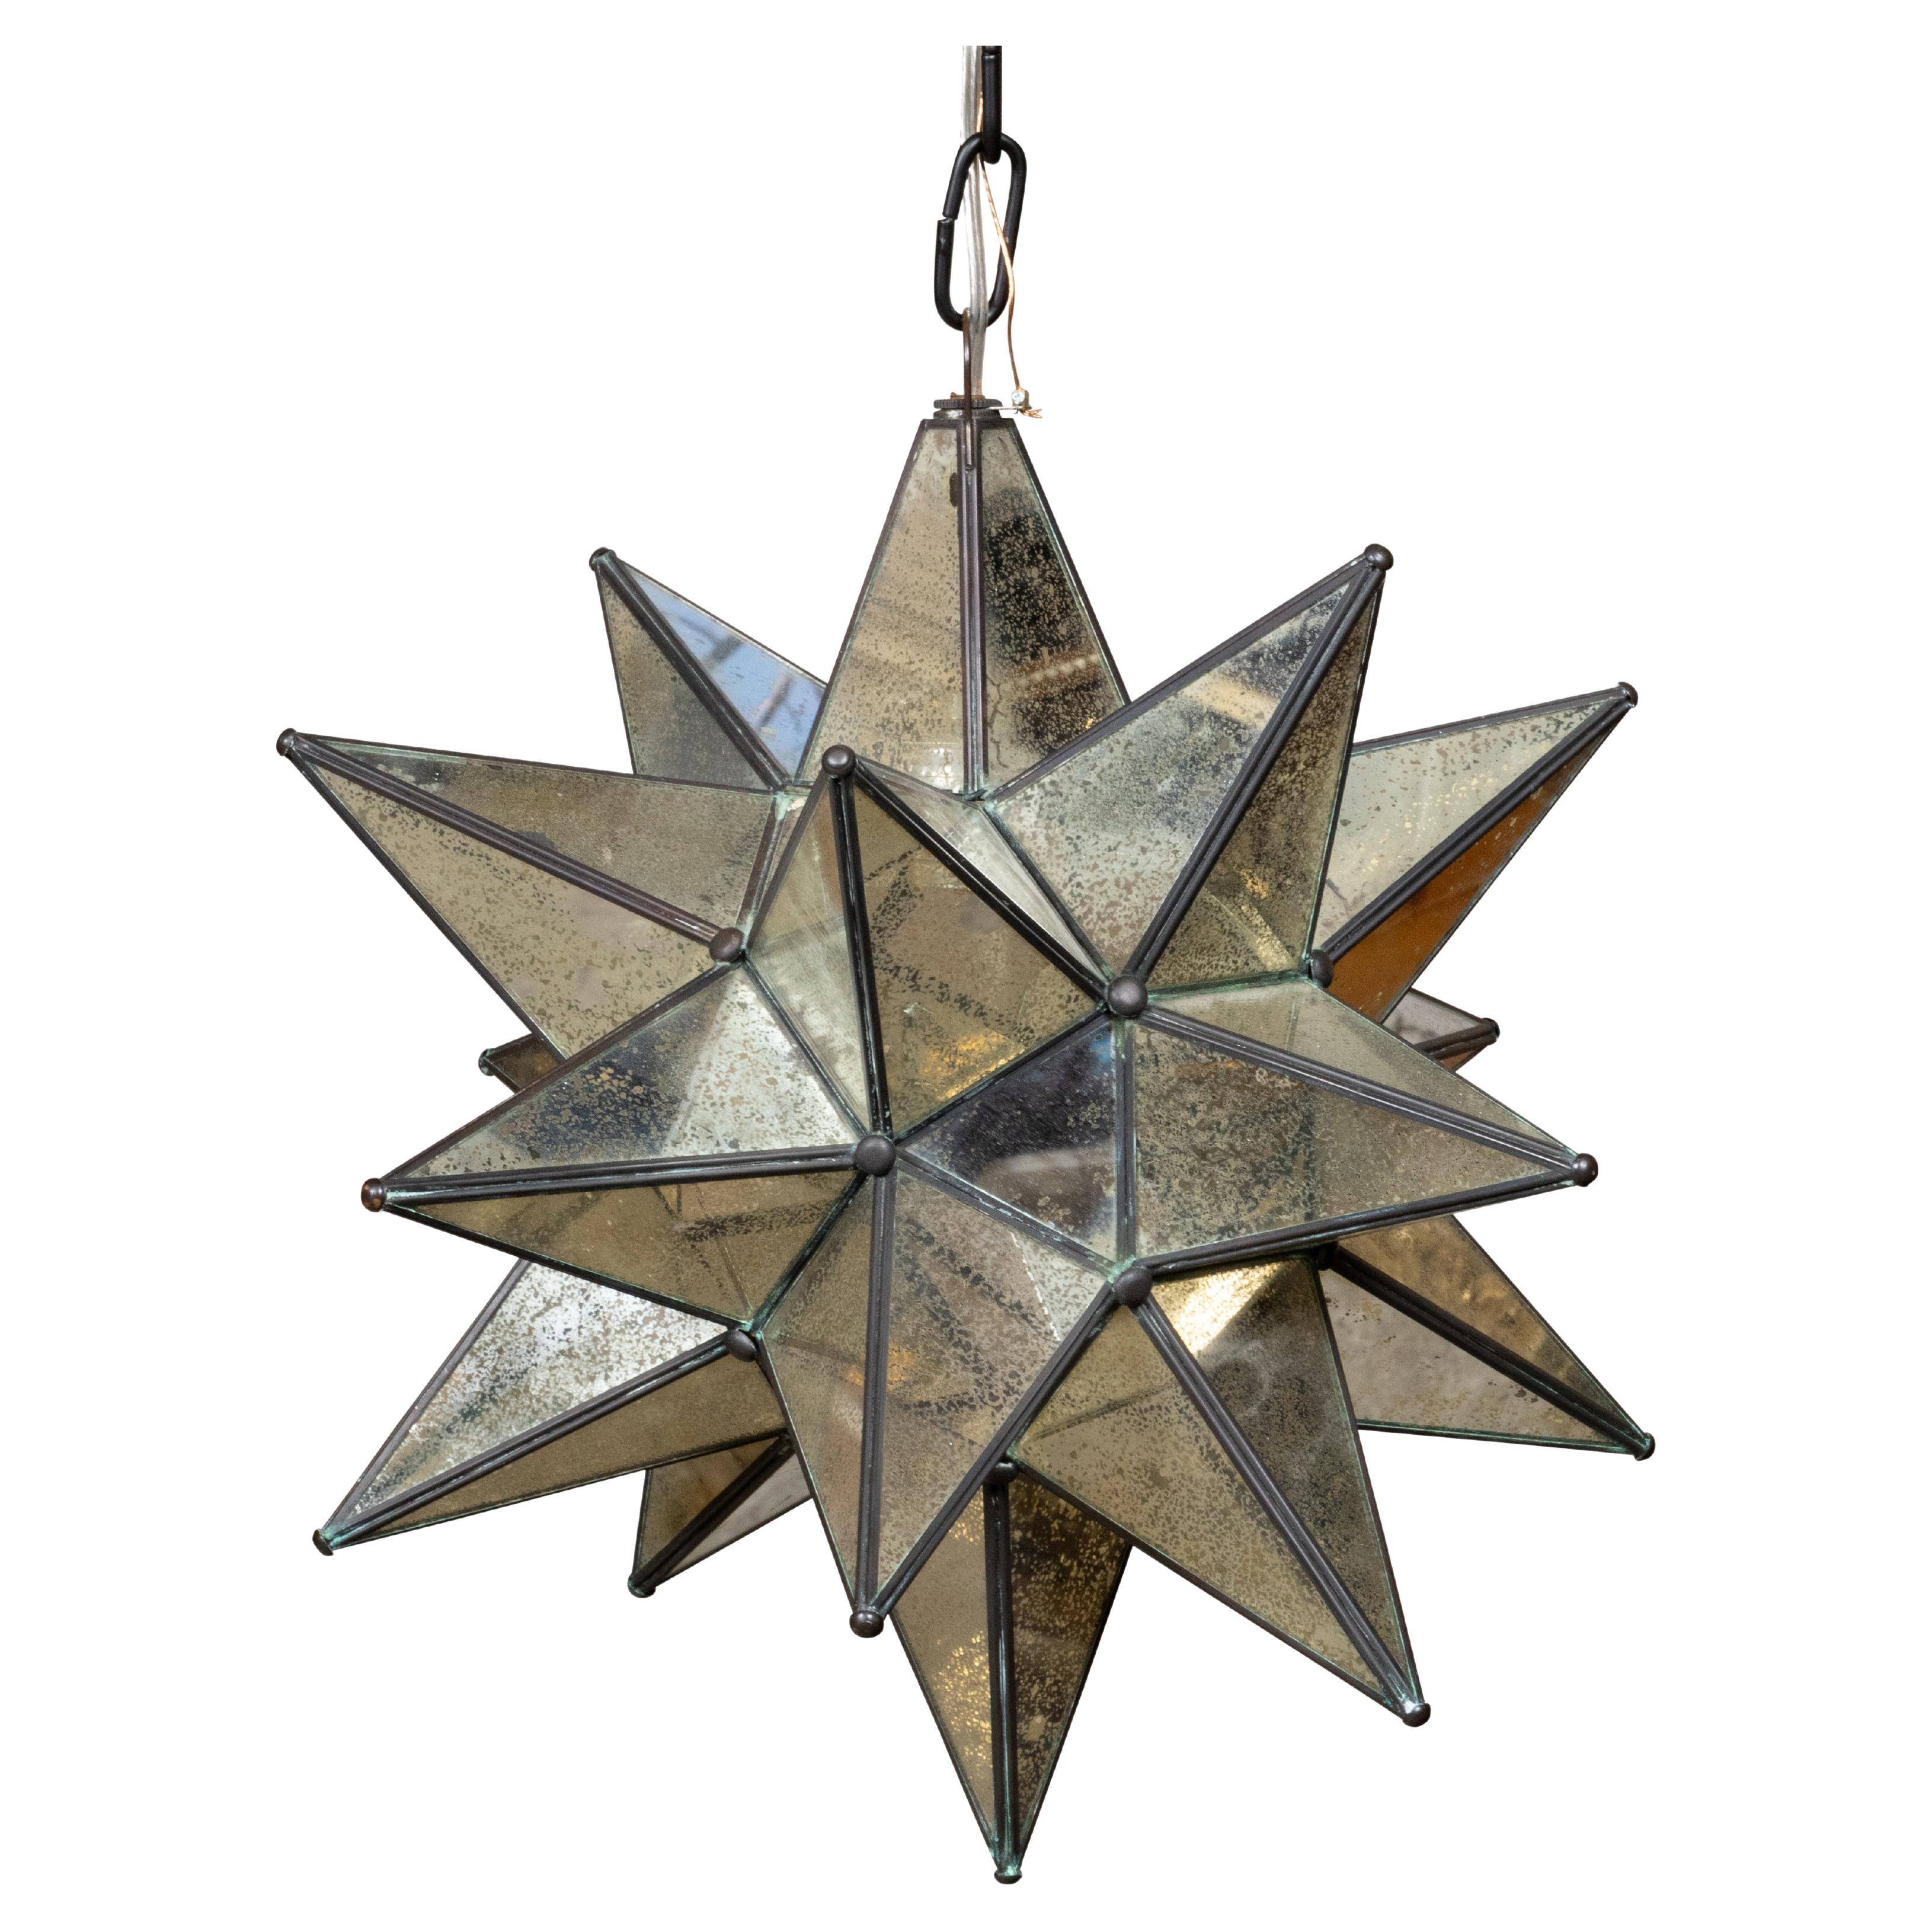 Midcentury French Star Shaped Light Fixture with Mirrored Panels, USA Wired For Sale